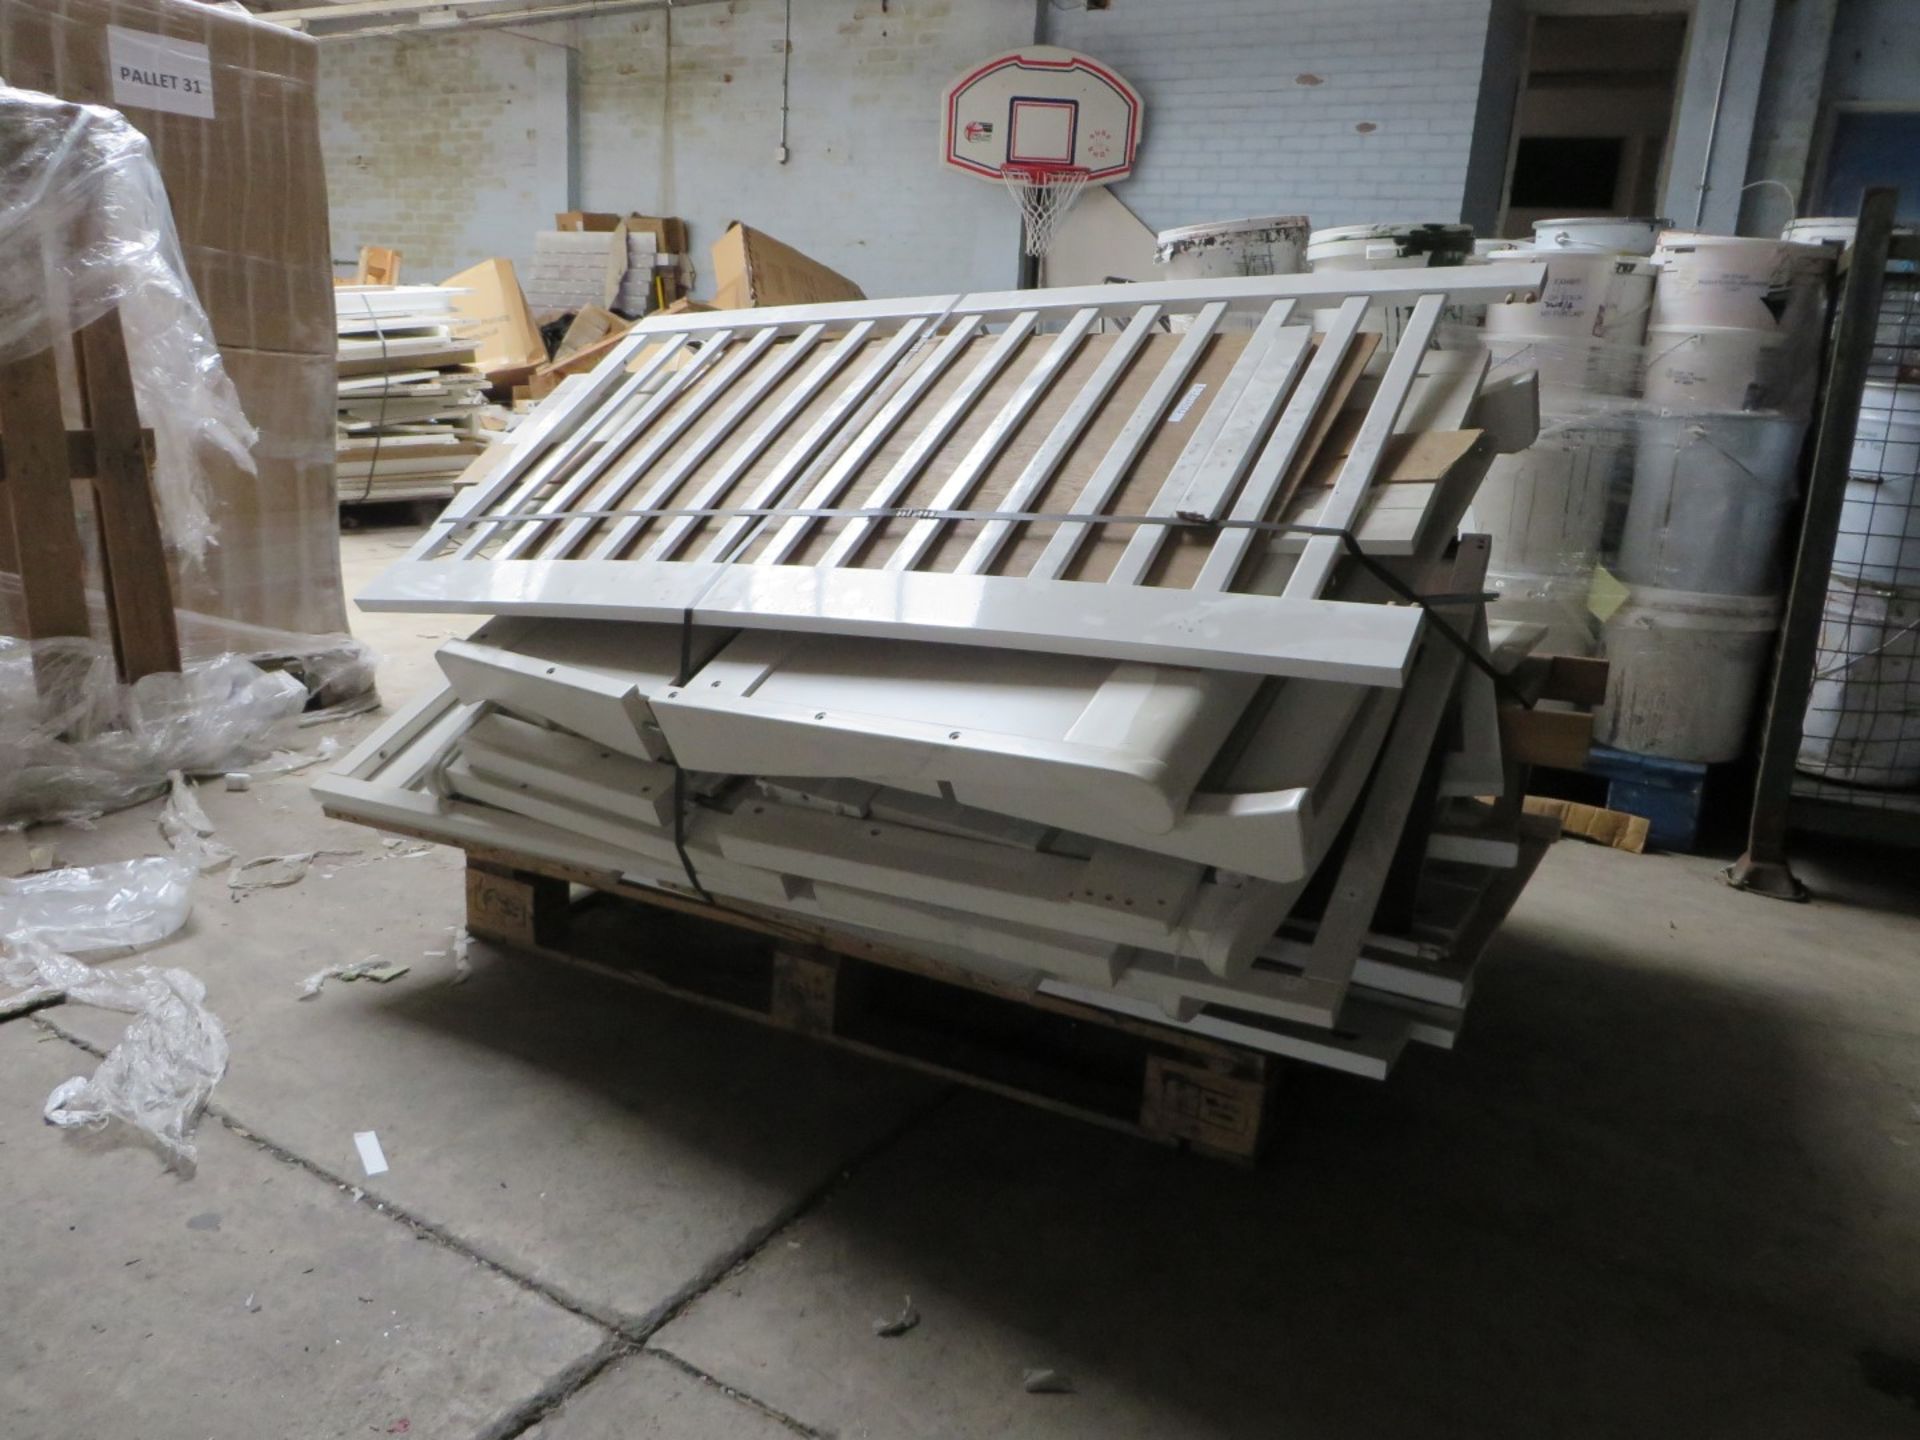 12 x Pallets of Assorted Silver Cross Nursery Furniture - CL185 - Ref: DSYMULTI - Location: Stoke-on - Image 3 of 13